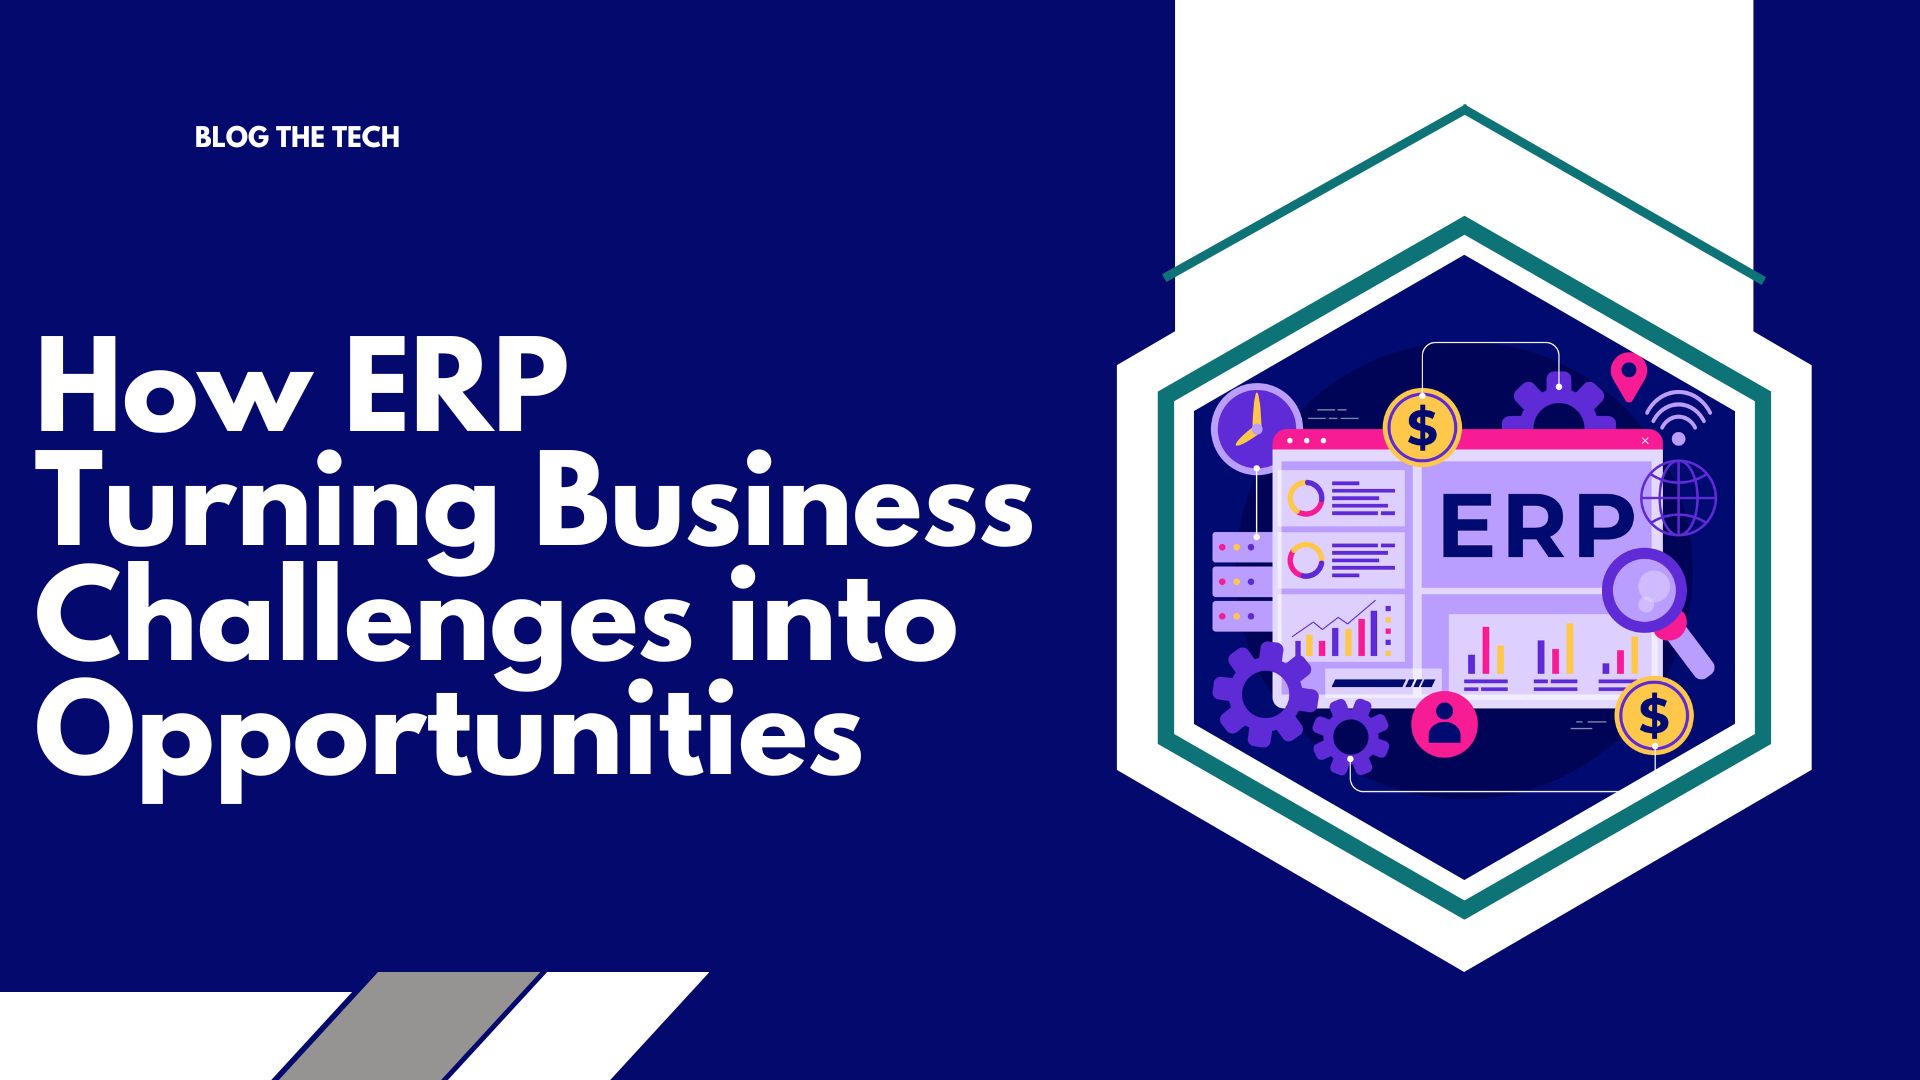 <strong>How ERP Turning Business Challenges into Opportunities</strong>